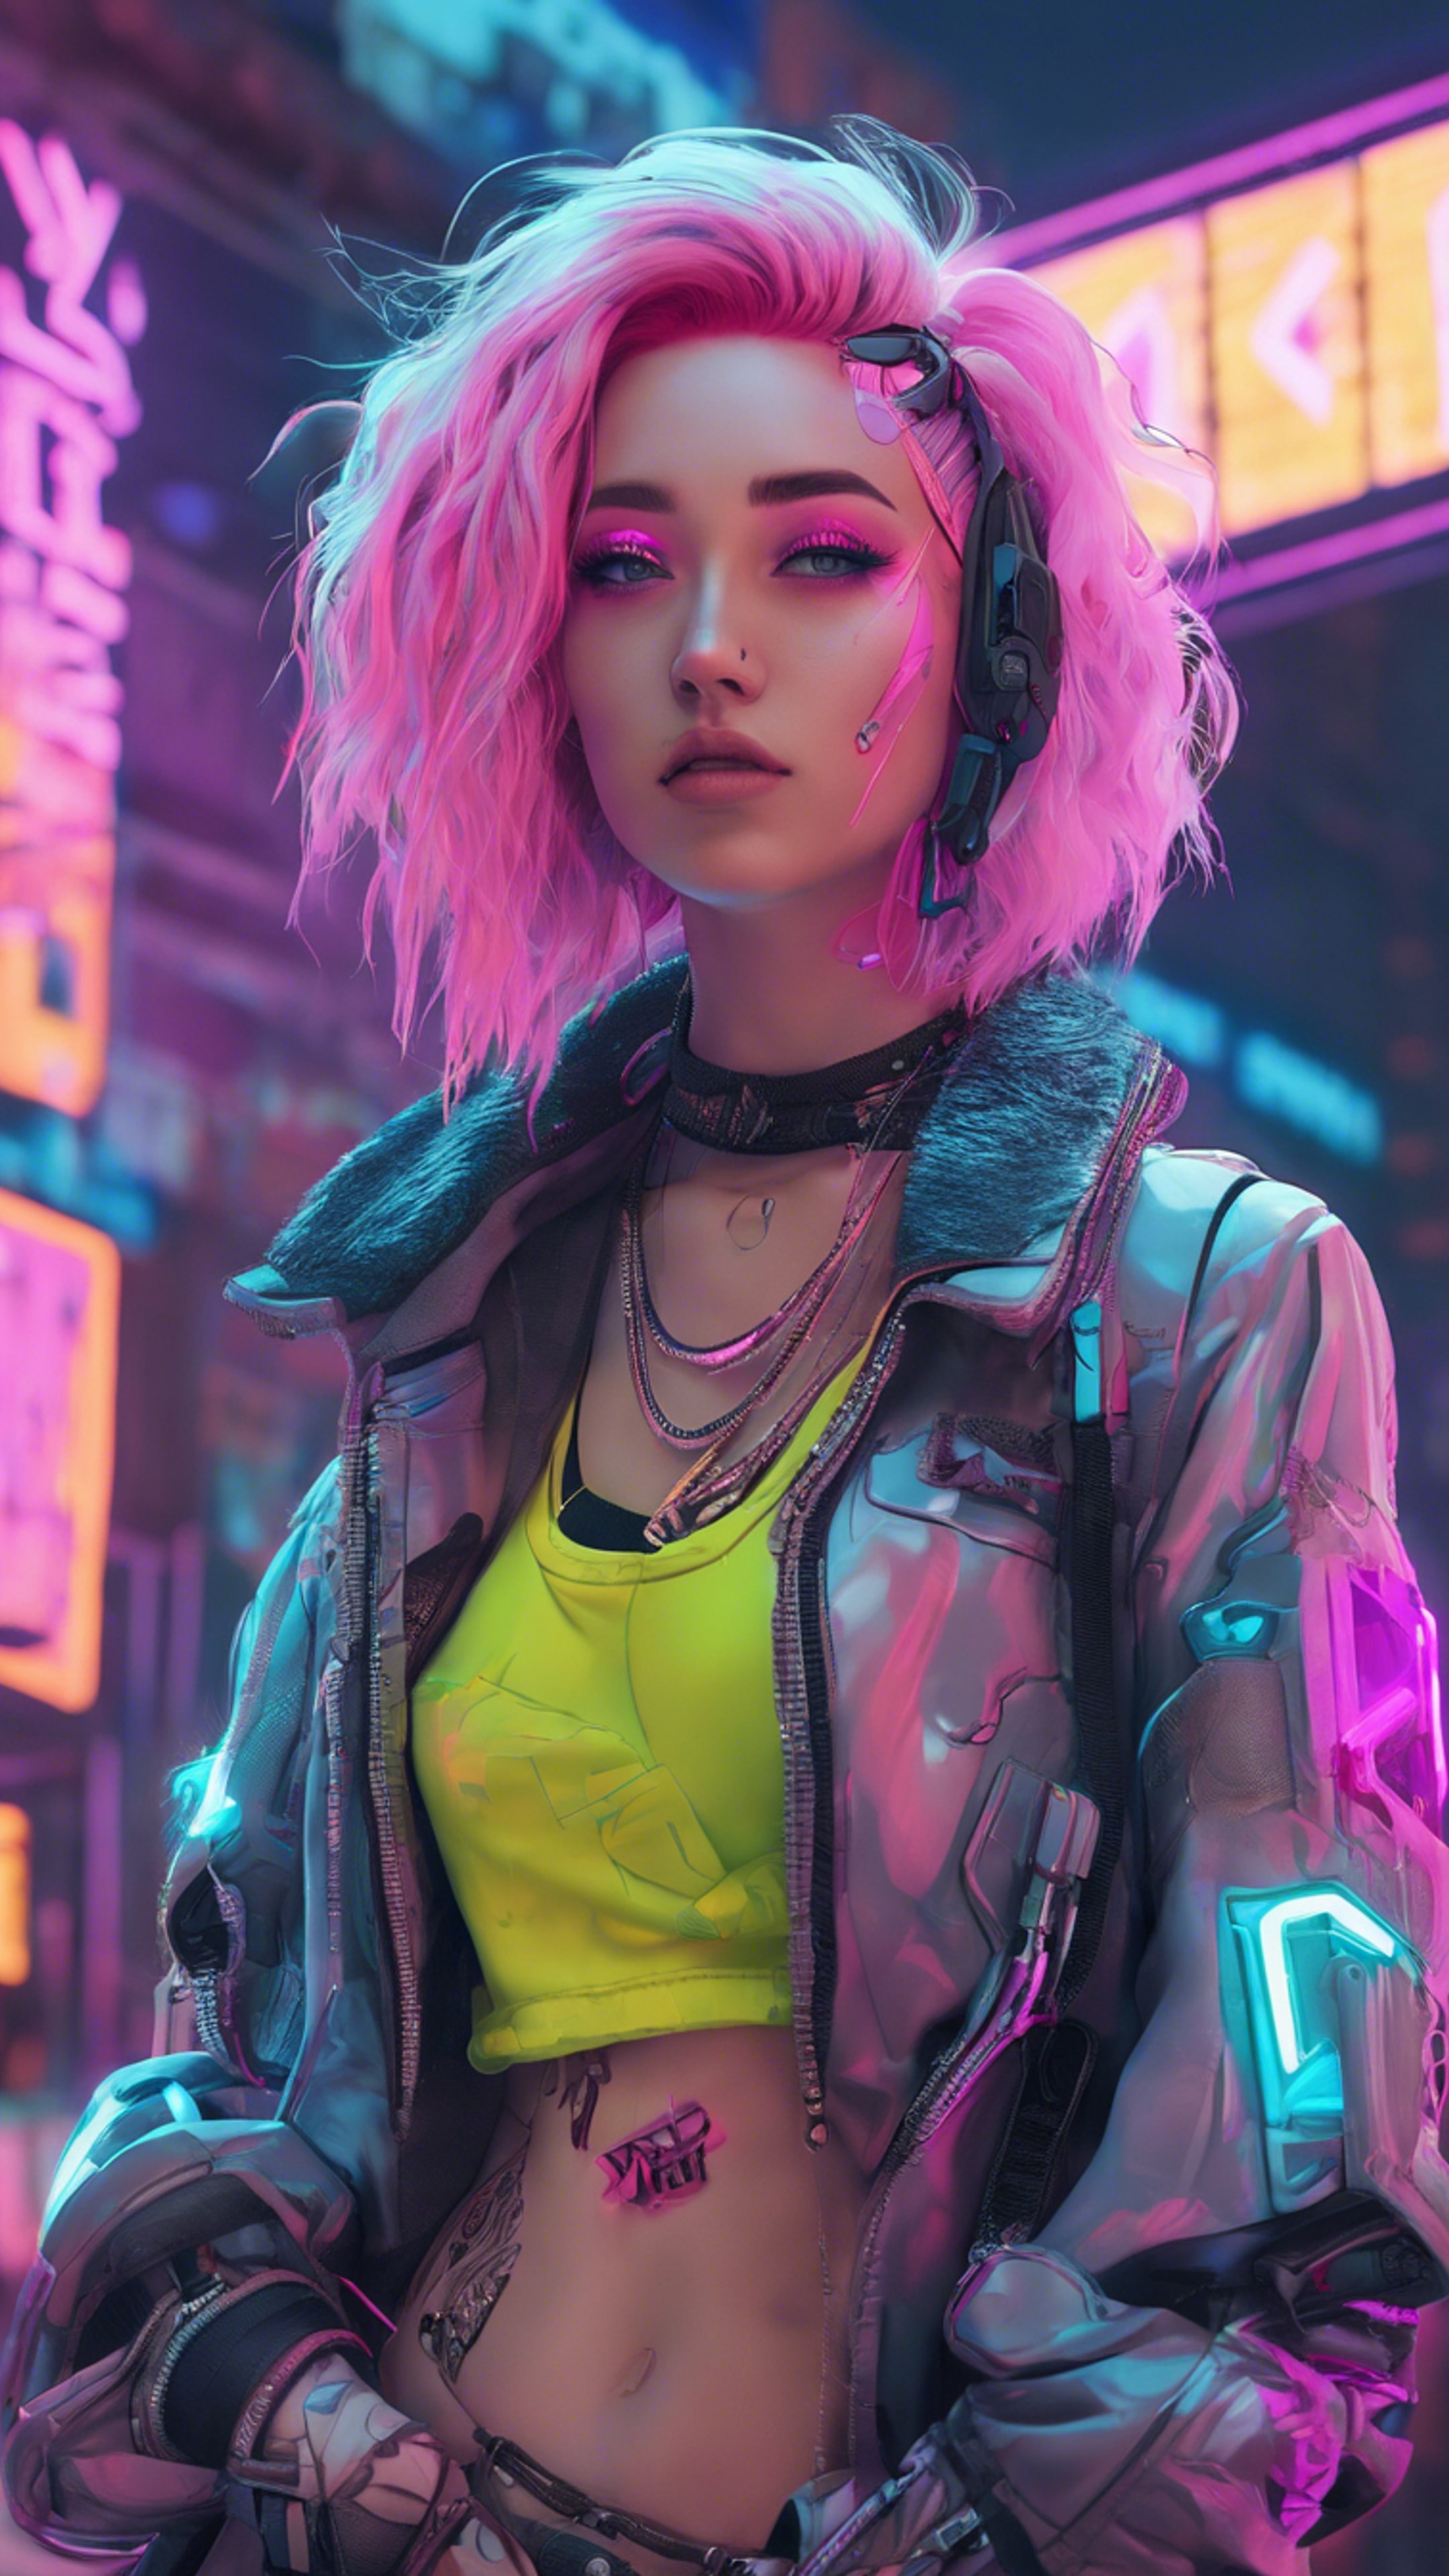 A pastel cyberpunk girl with brightly colored hair, standing in front of a neon sign.壁紙[dbbad63d7b584975aa4e]